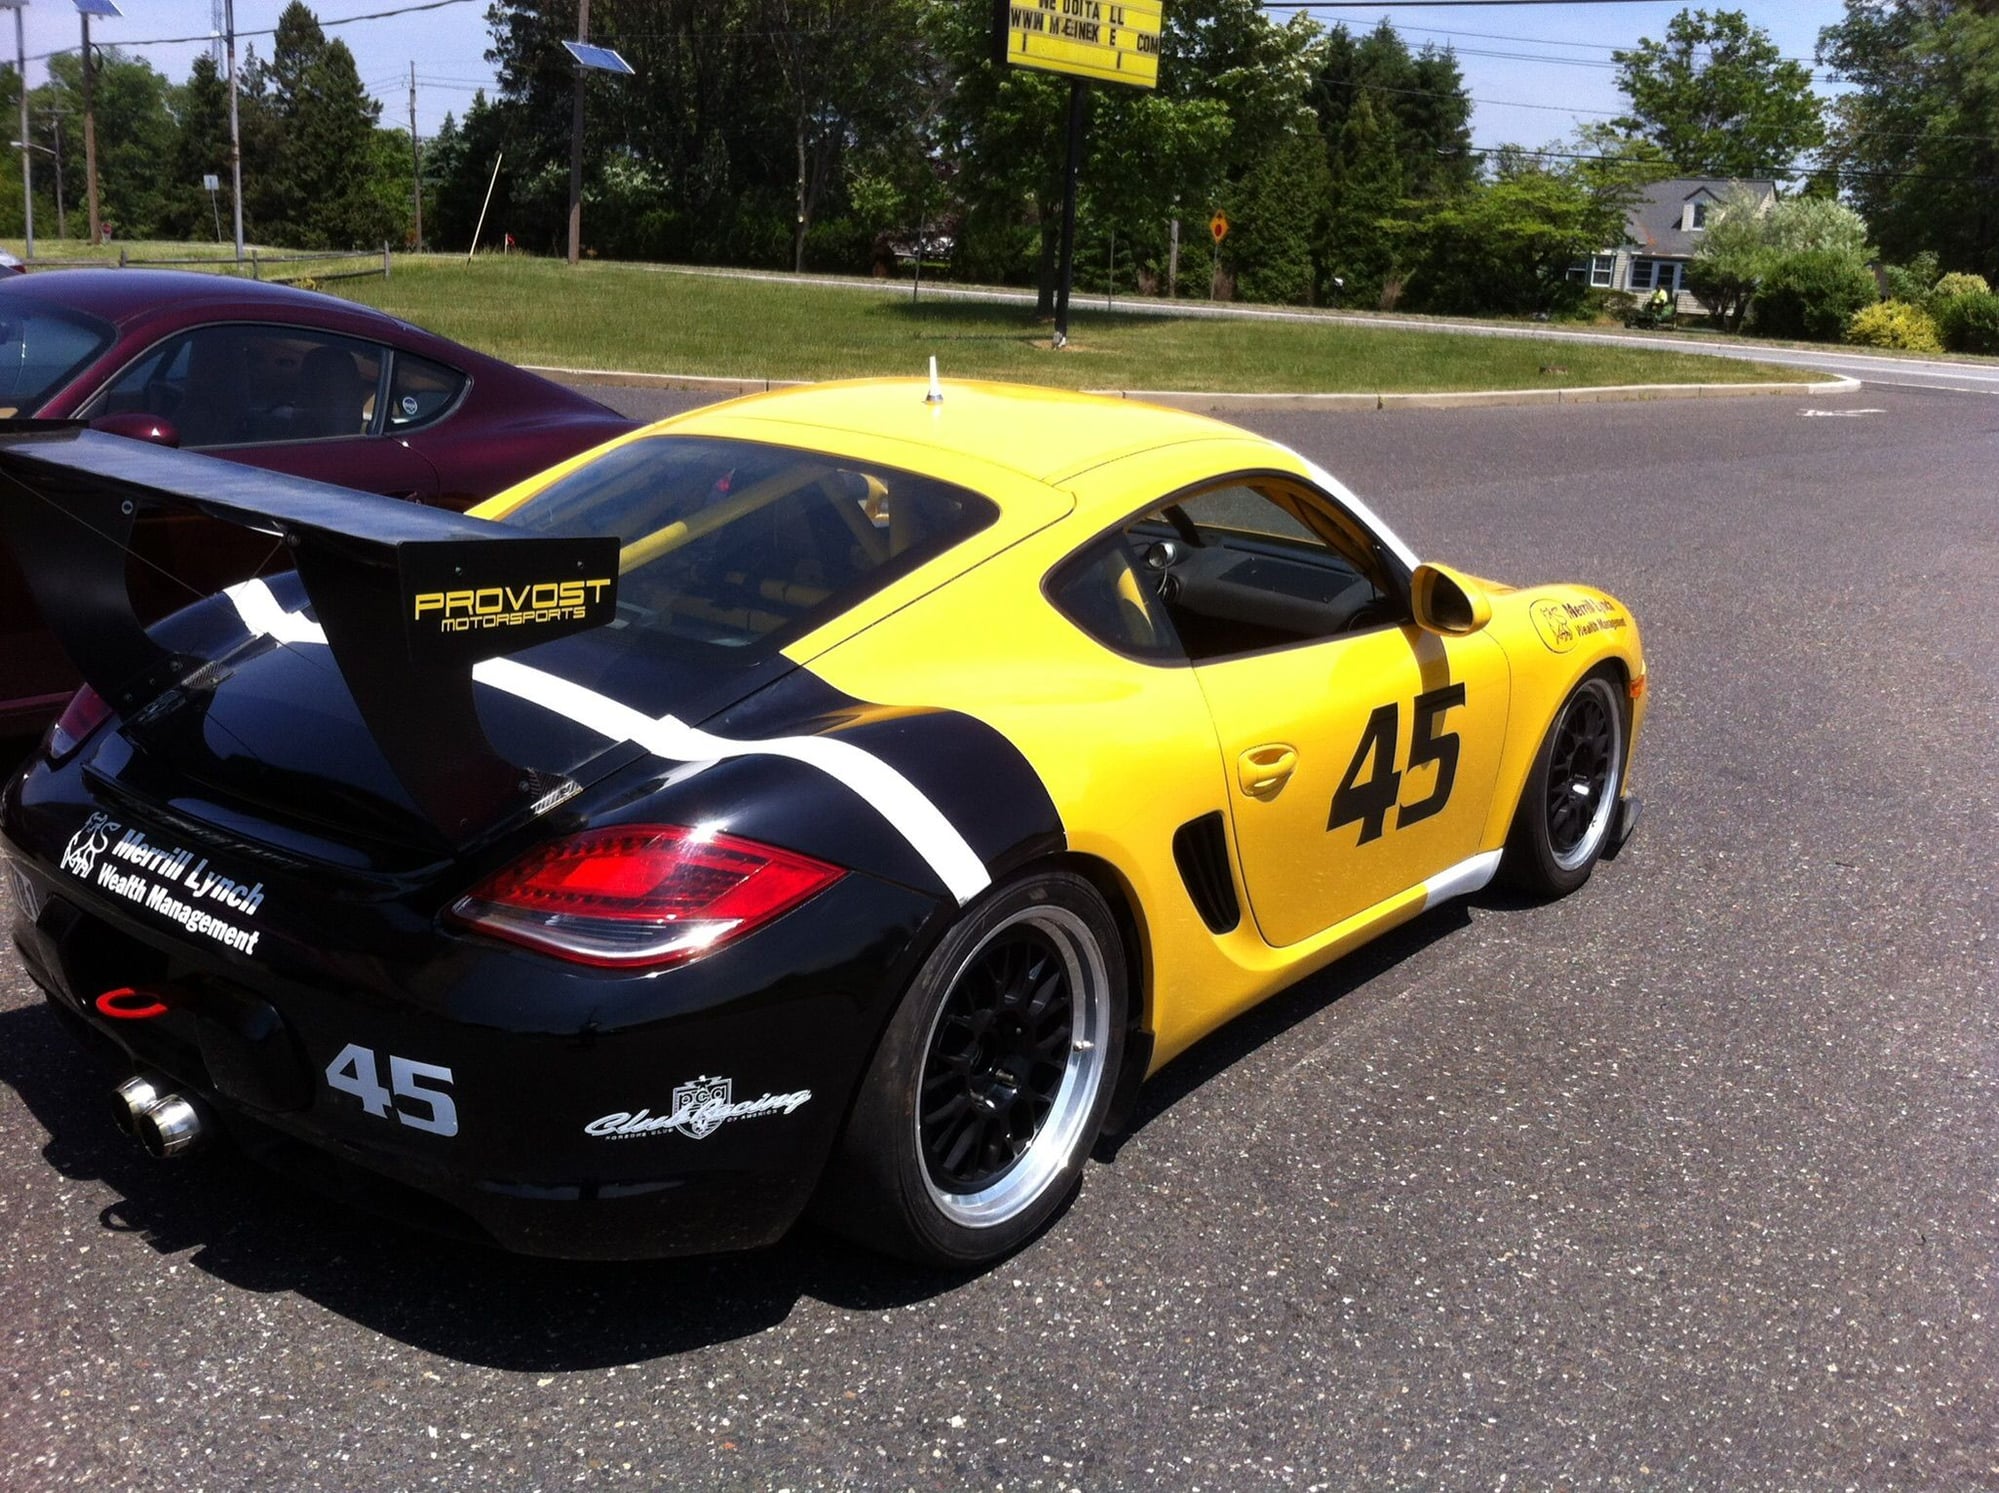 2009 Porsche Cayman - Cayman S Grand Am Conti Race Car For SALE - Used - VIN WP0AB29899U780489 - 9,875 Miles - 6 cyl - 2WD - Manual - Coupe - Yellow - Newtown, PA 18940, United States